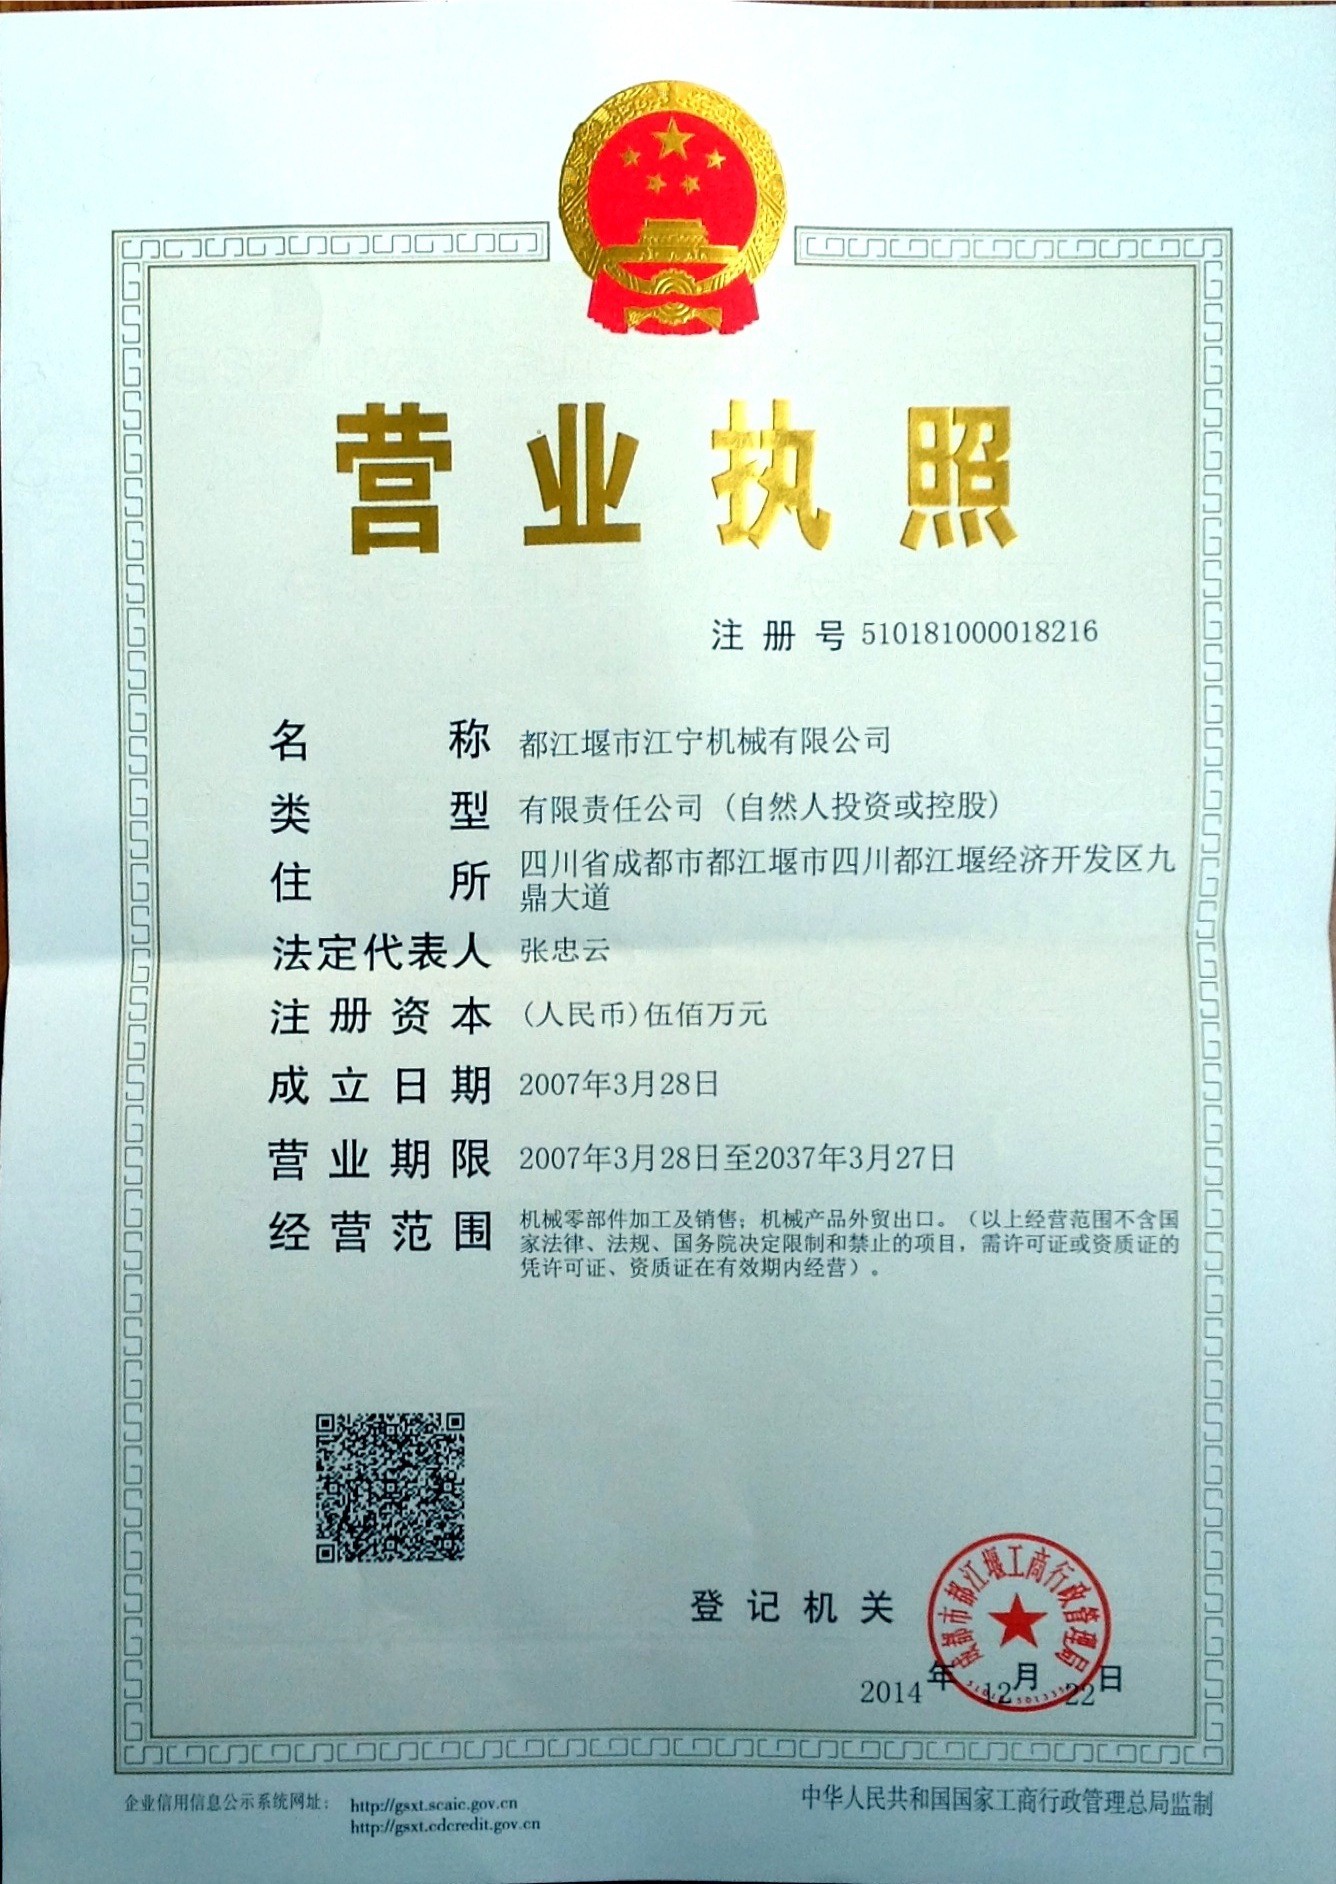 China Joiner Machinery Co., Ltd. Certification